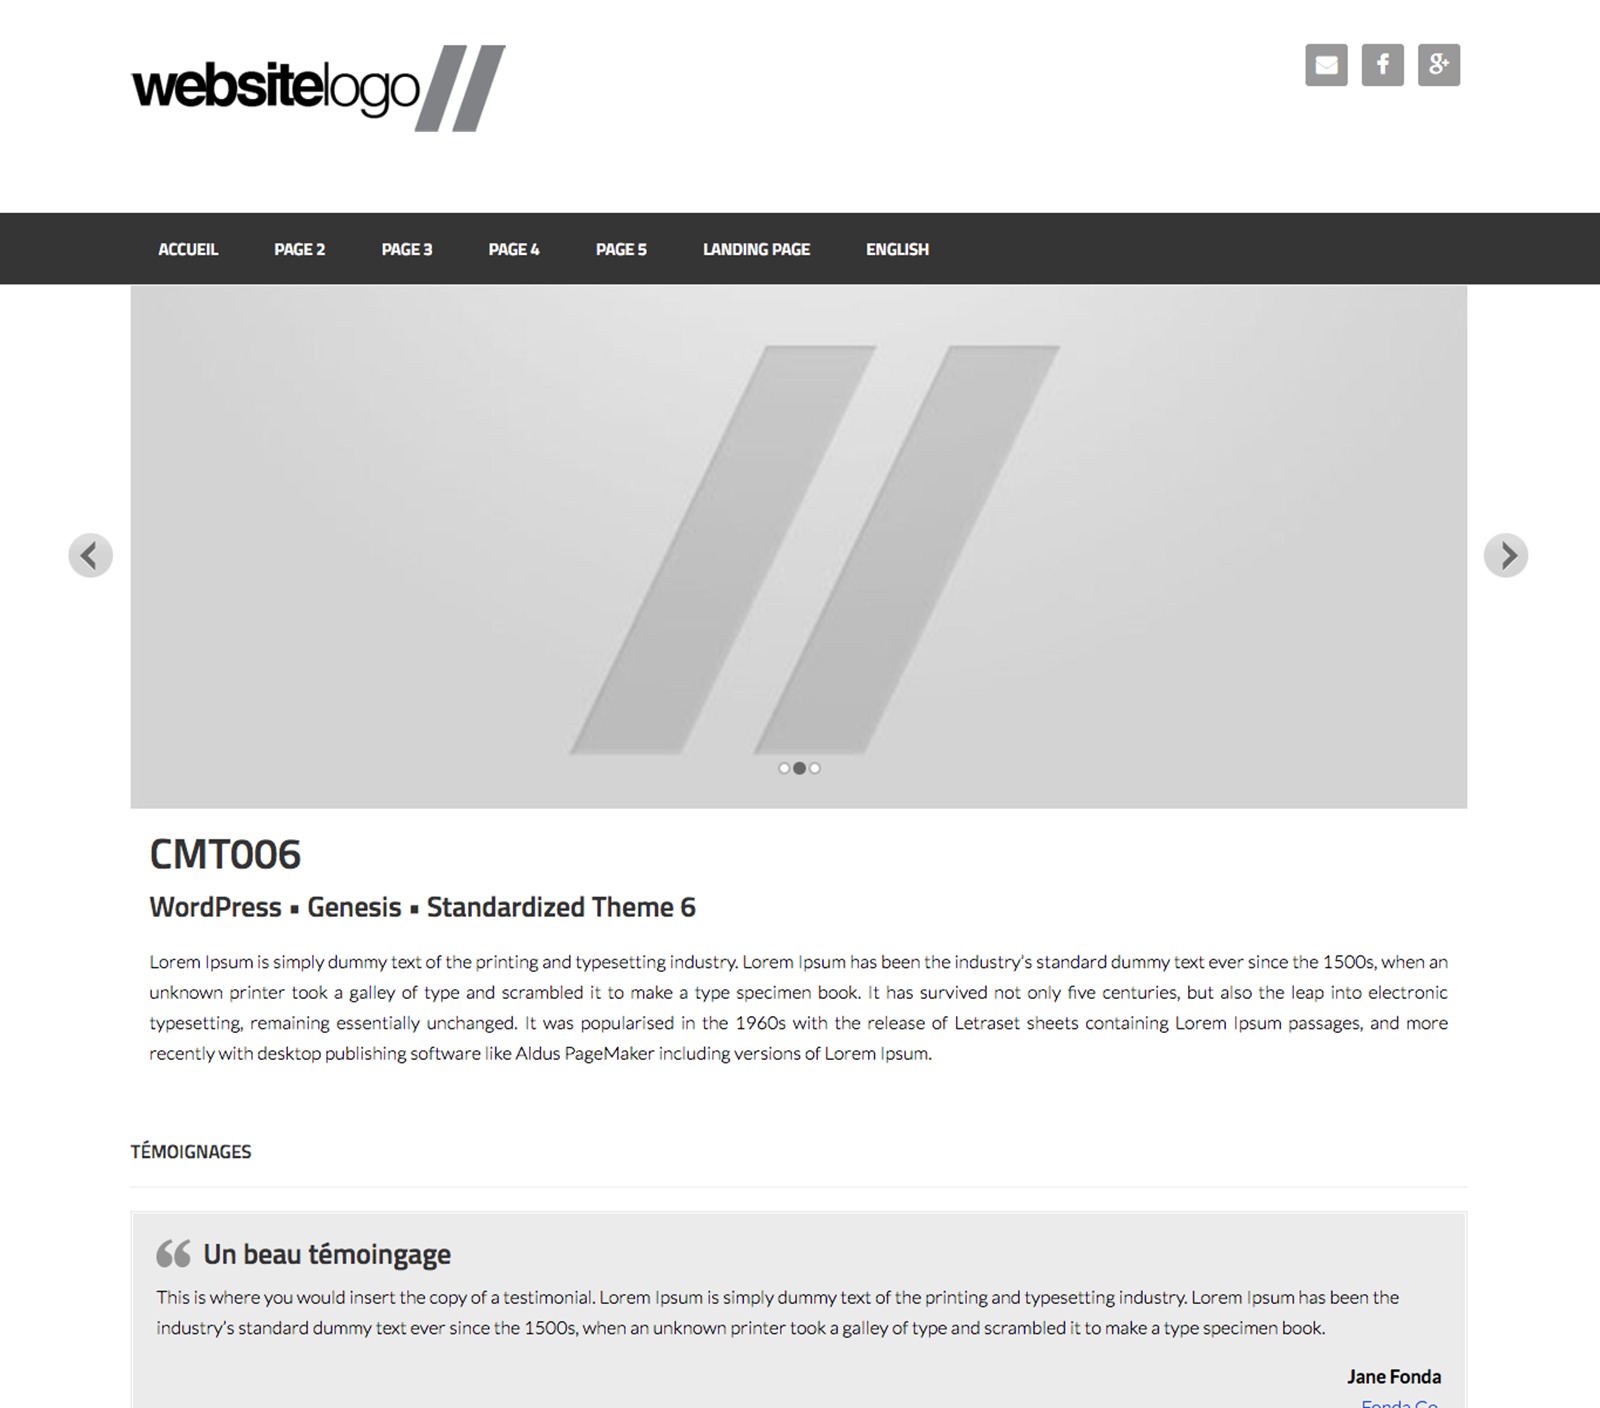 wp-template-cmt006-mapy-o.jpg